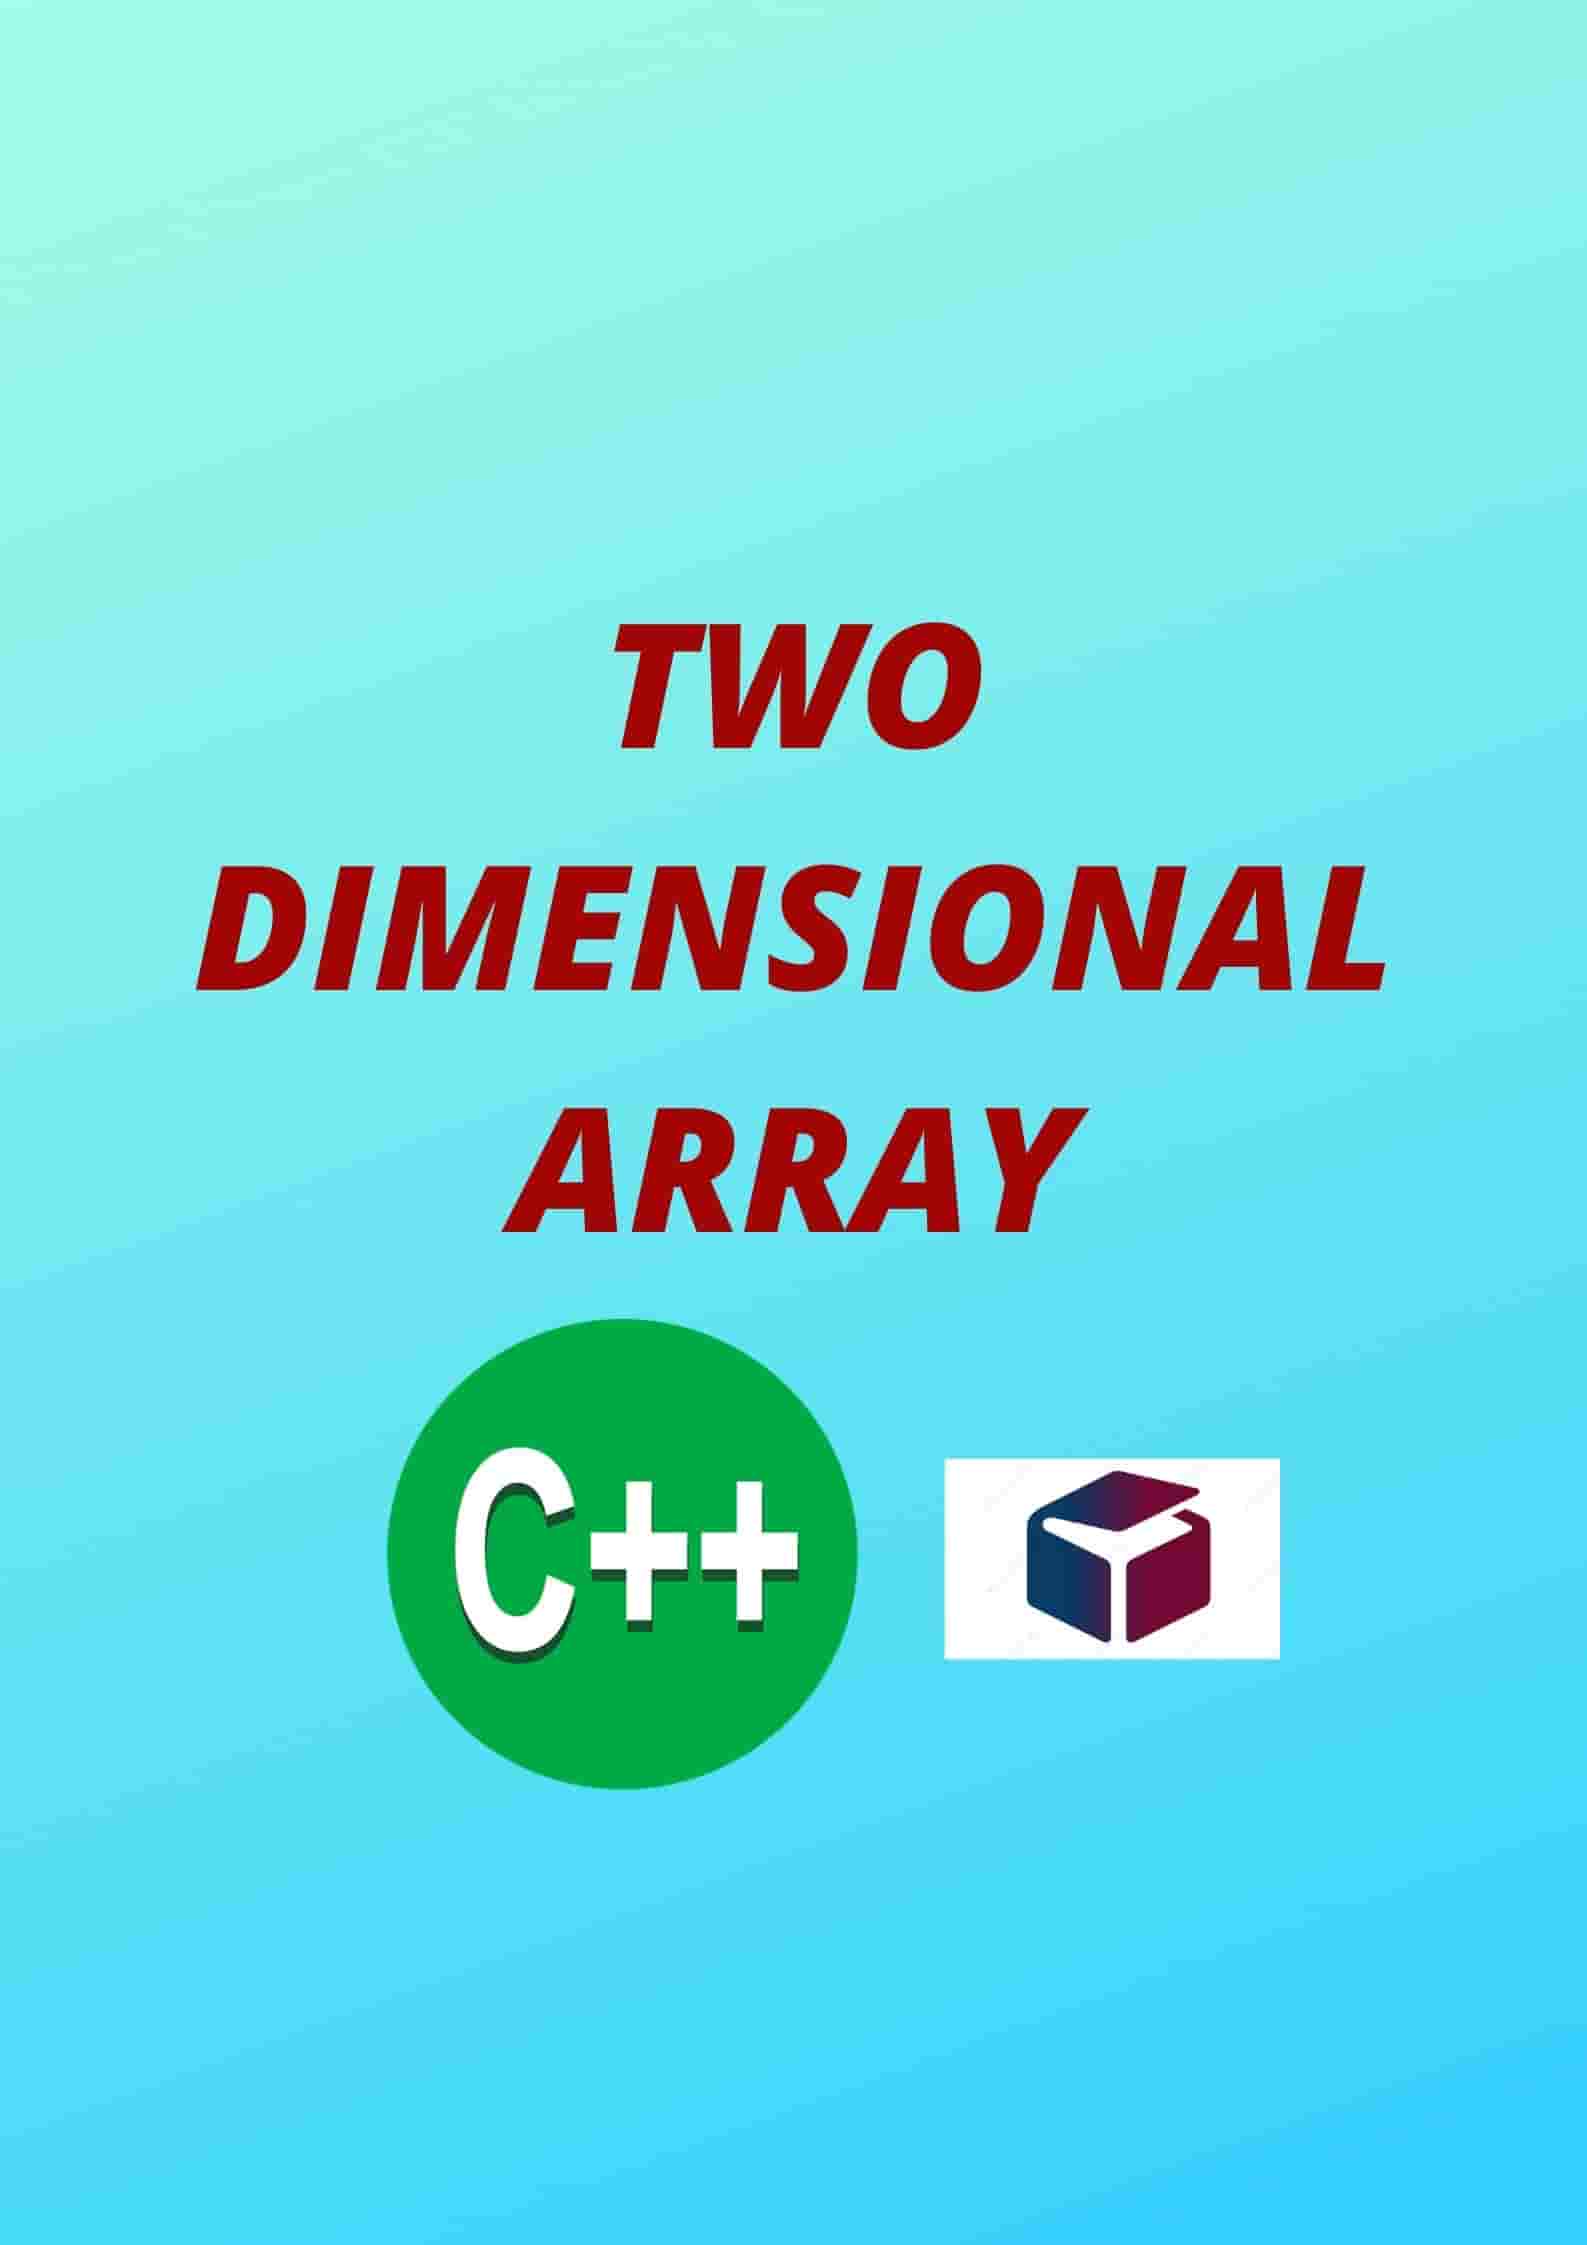 What is a two dimensional array